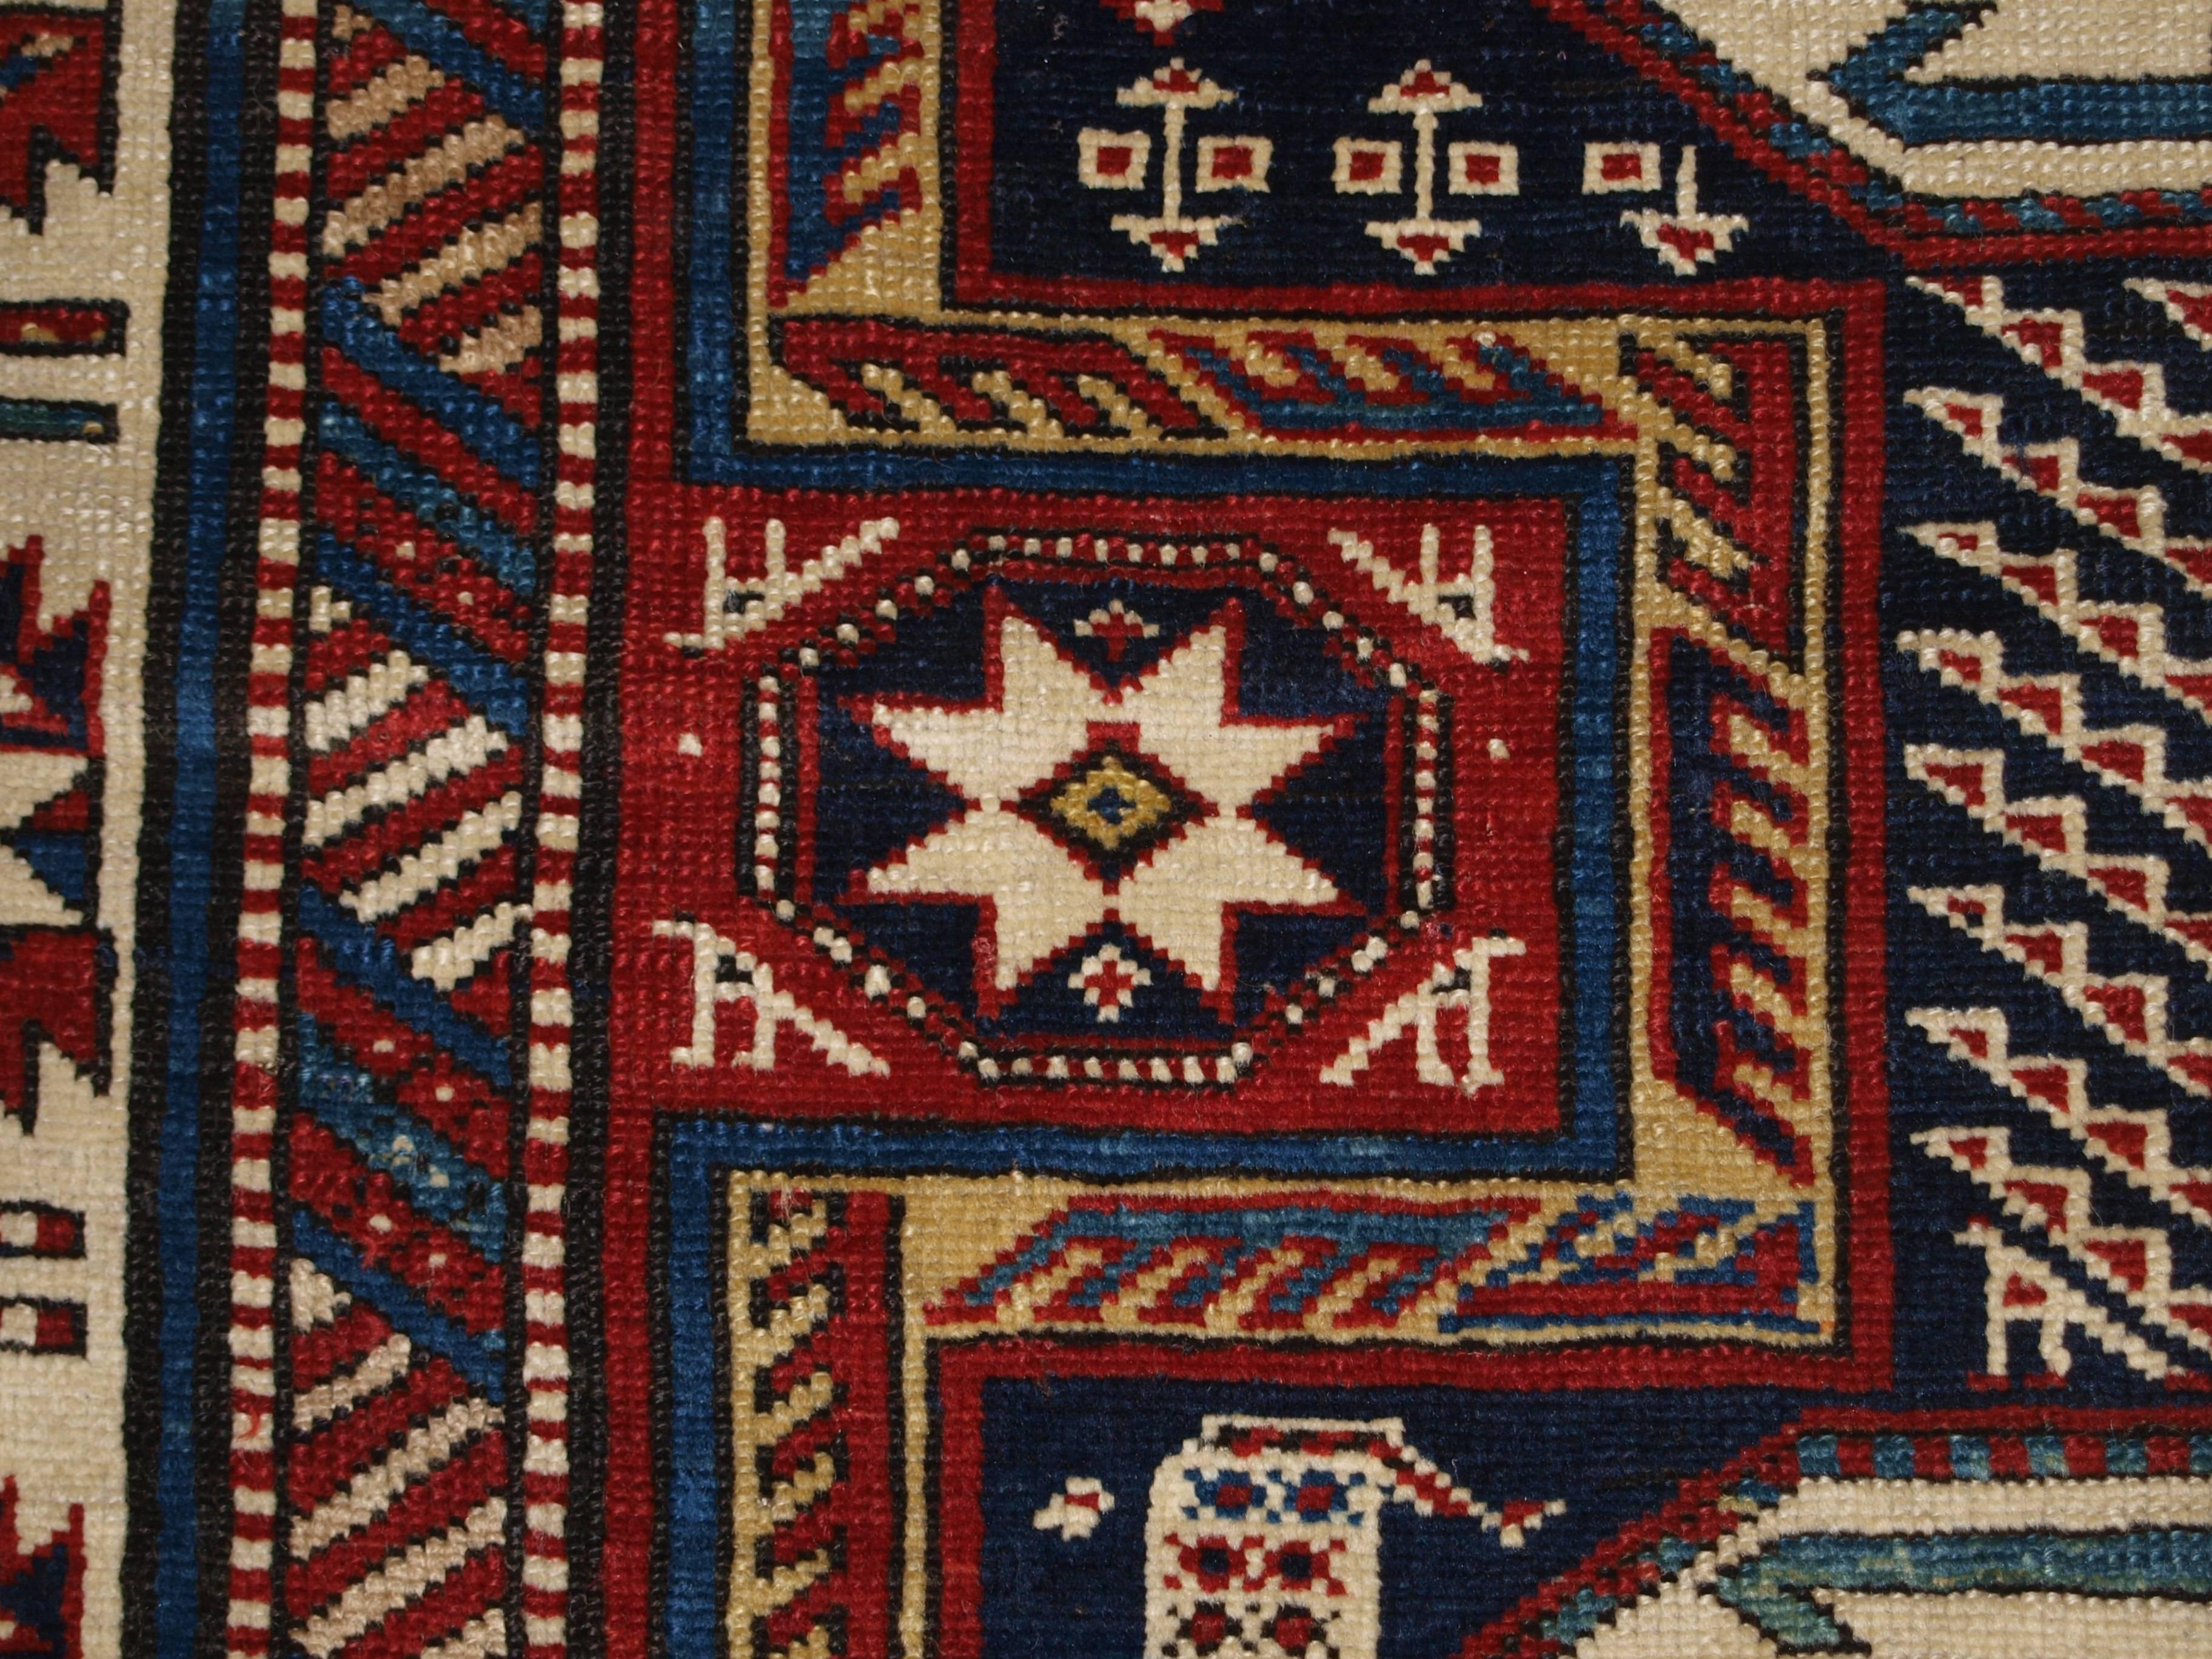 Antique Caucasian Shirvan Rug with 'Surahani' Garden Design, Late 19th Century For Sale 4